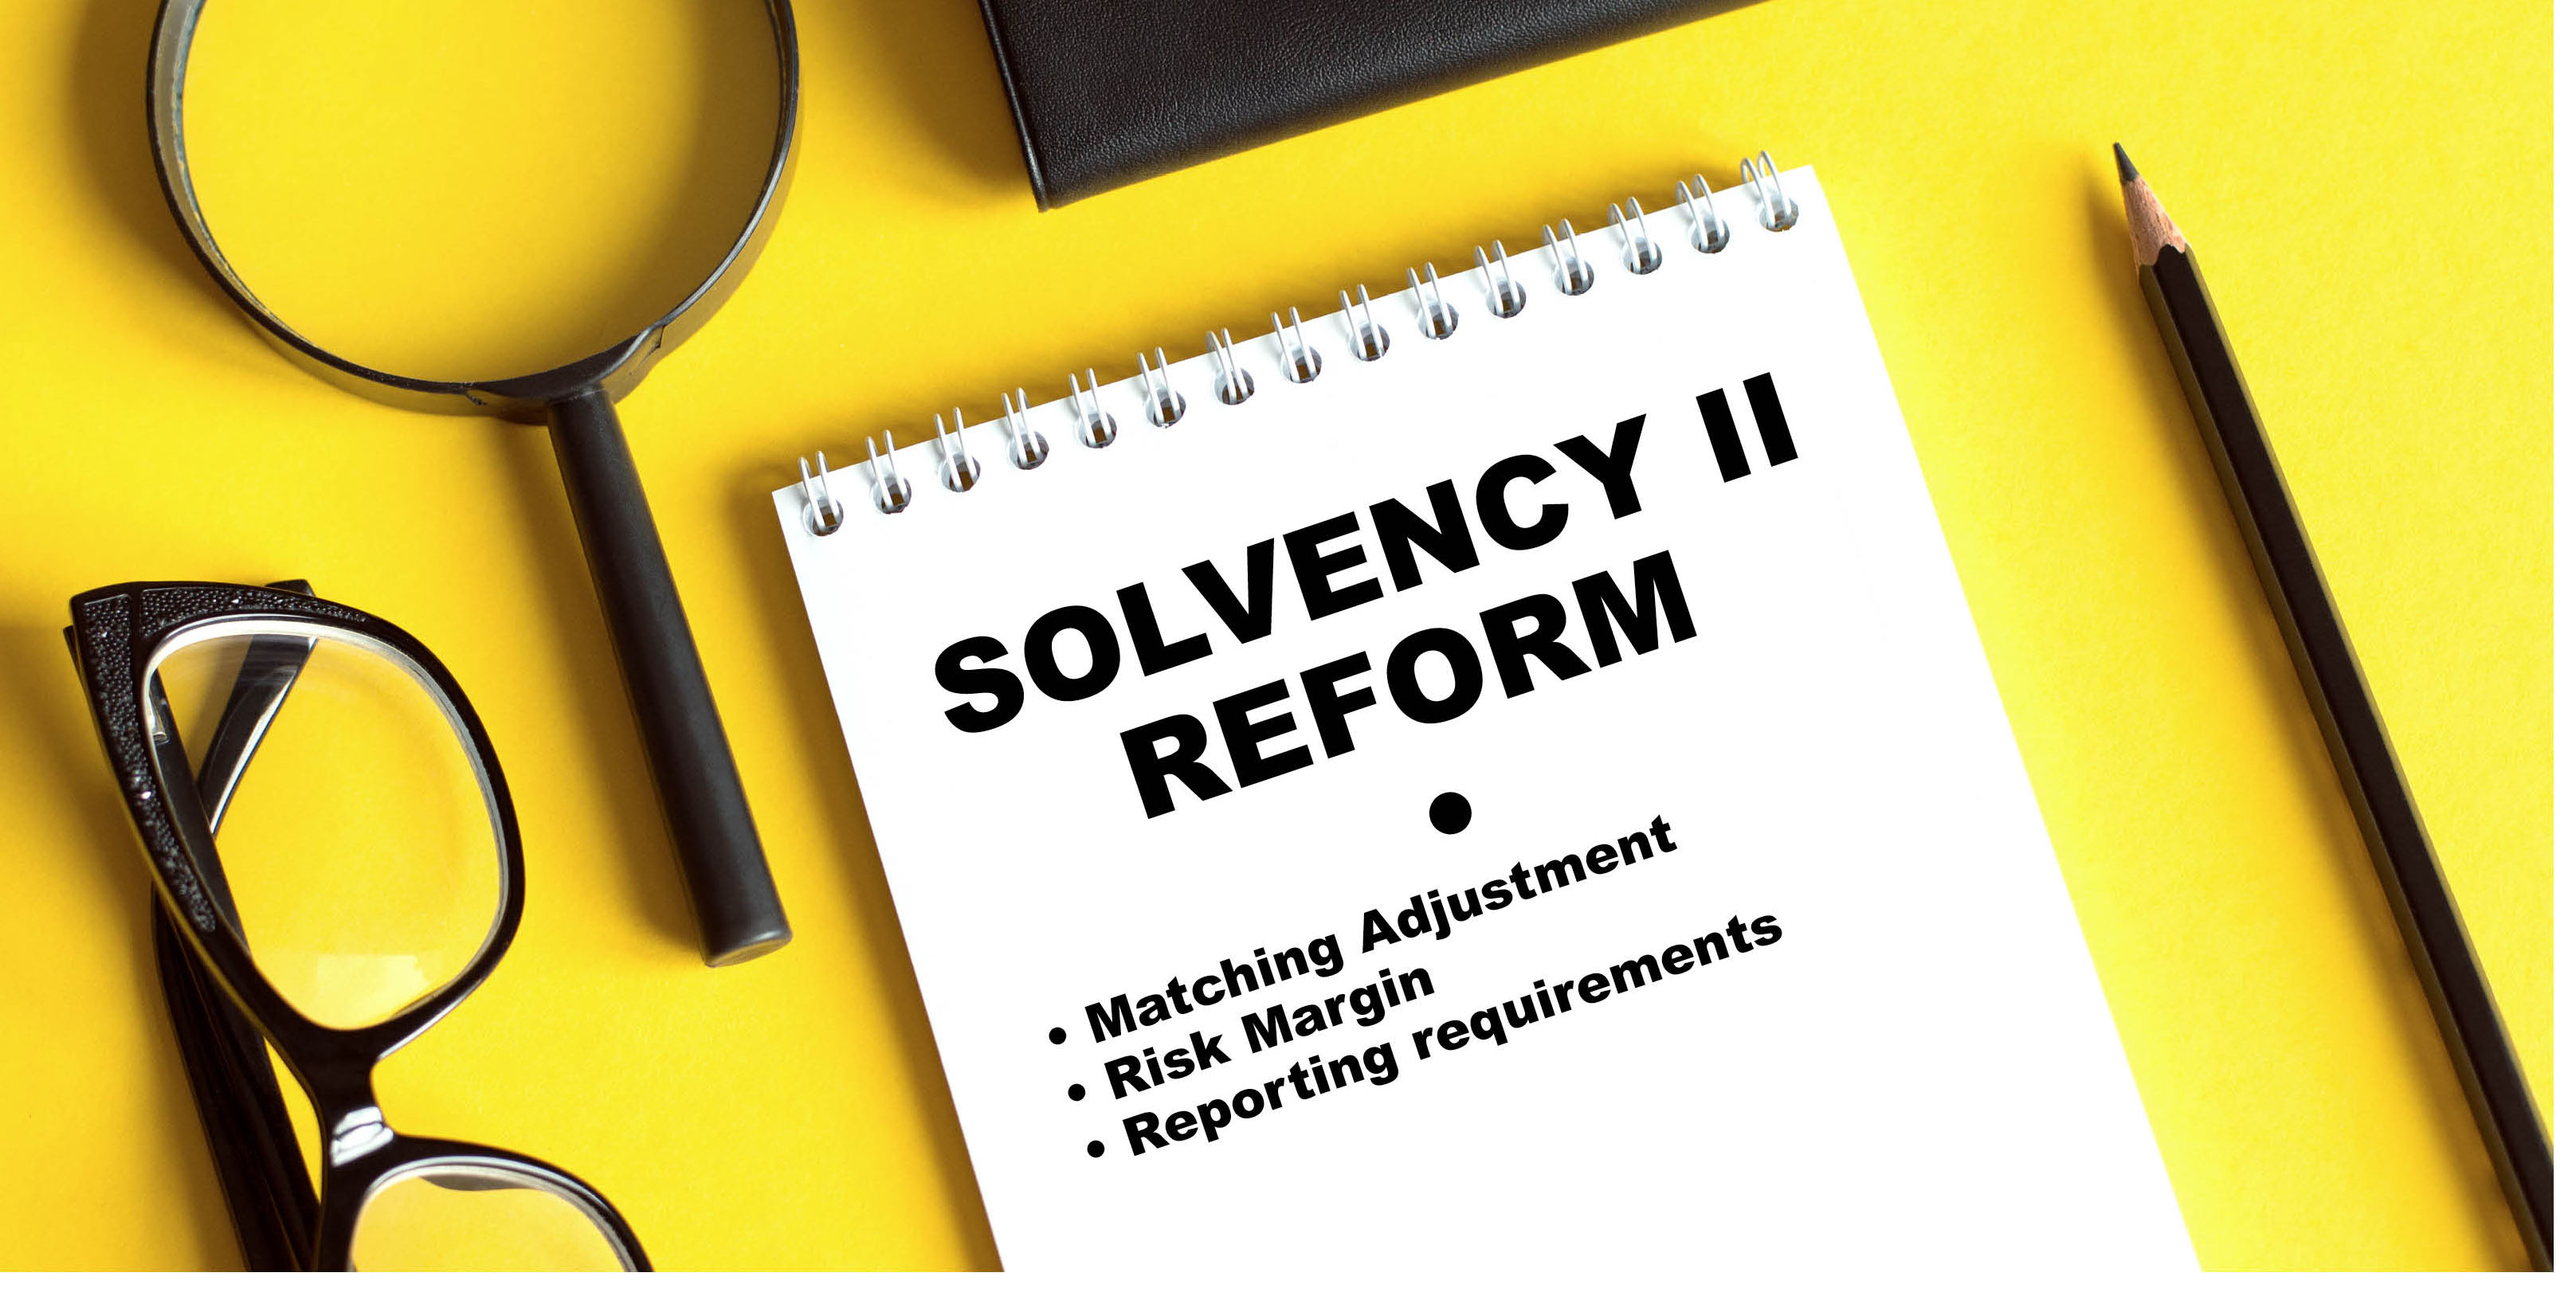 No “Big Bang” for Solvency II reforms